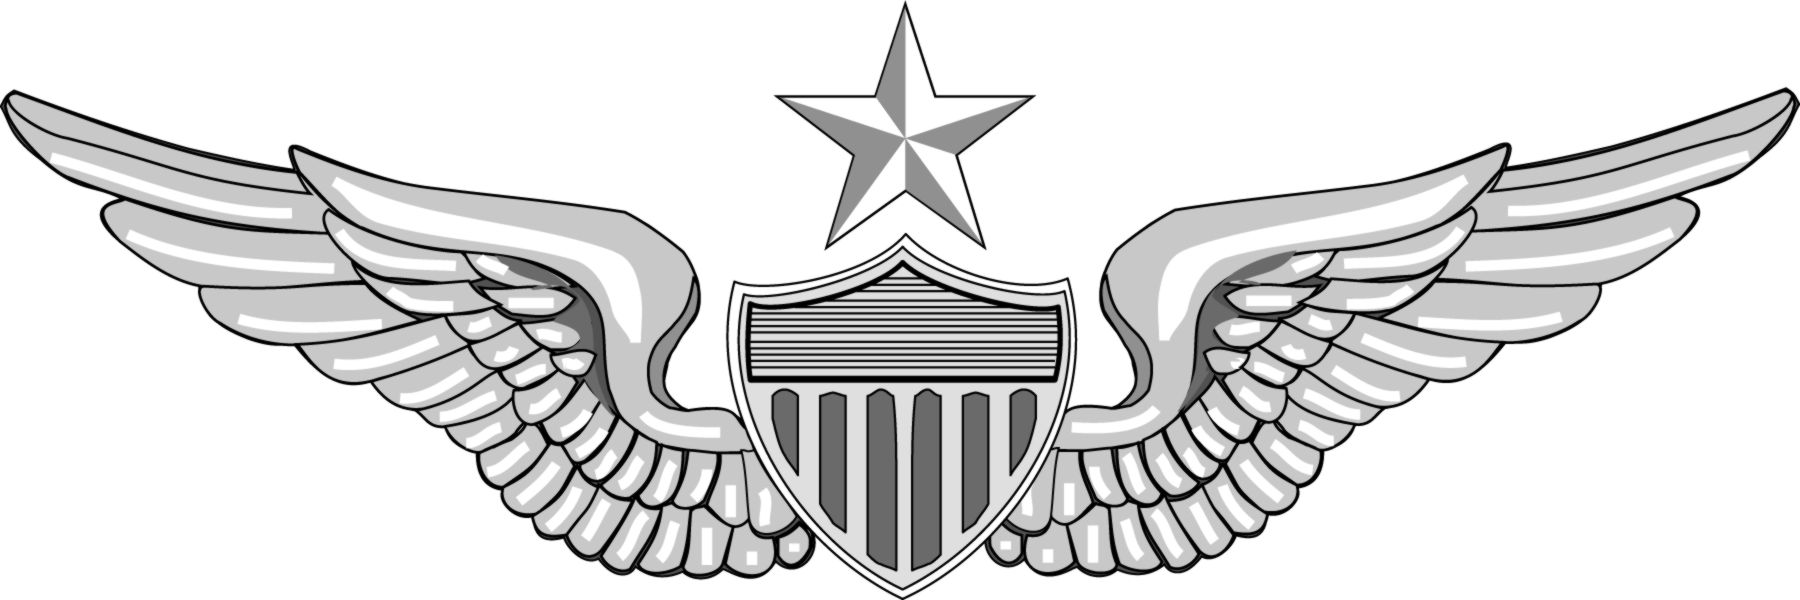 military badges clipart - photo #3